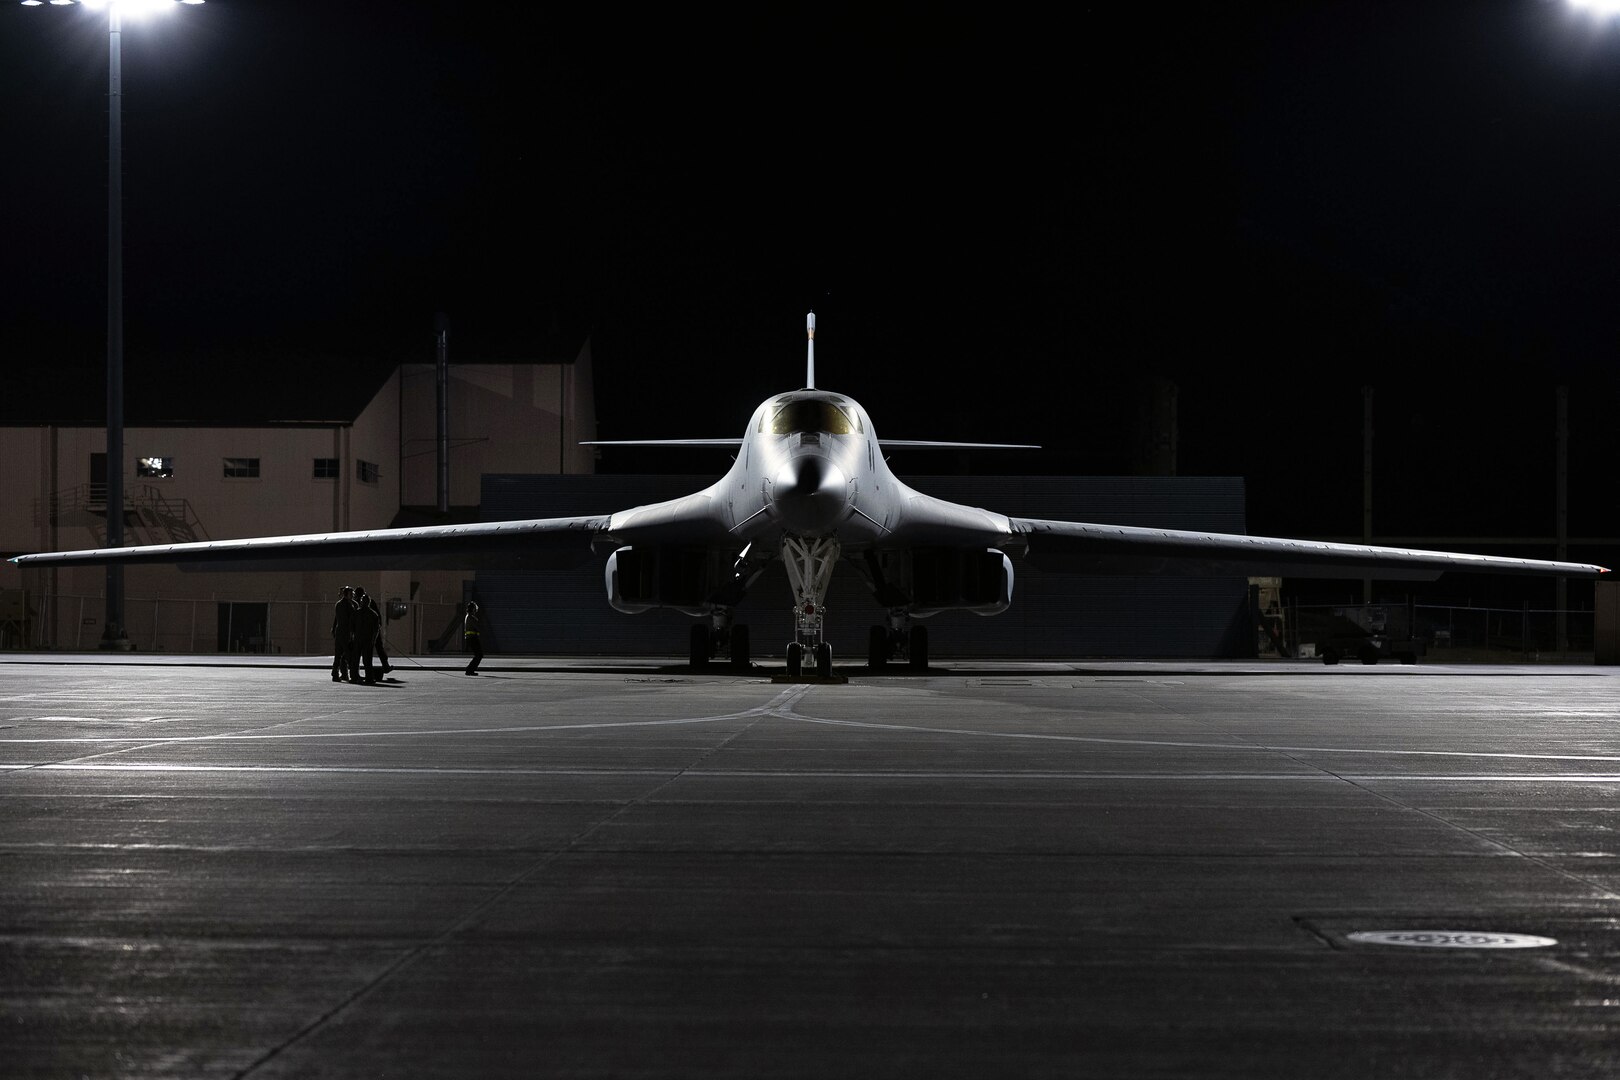 B-1B Lancers integrate with partners, build interoperability during exercise COPE INDIA 2023